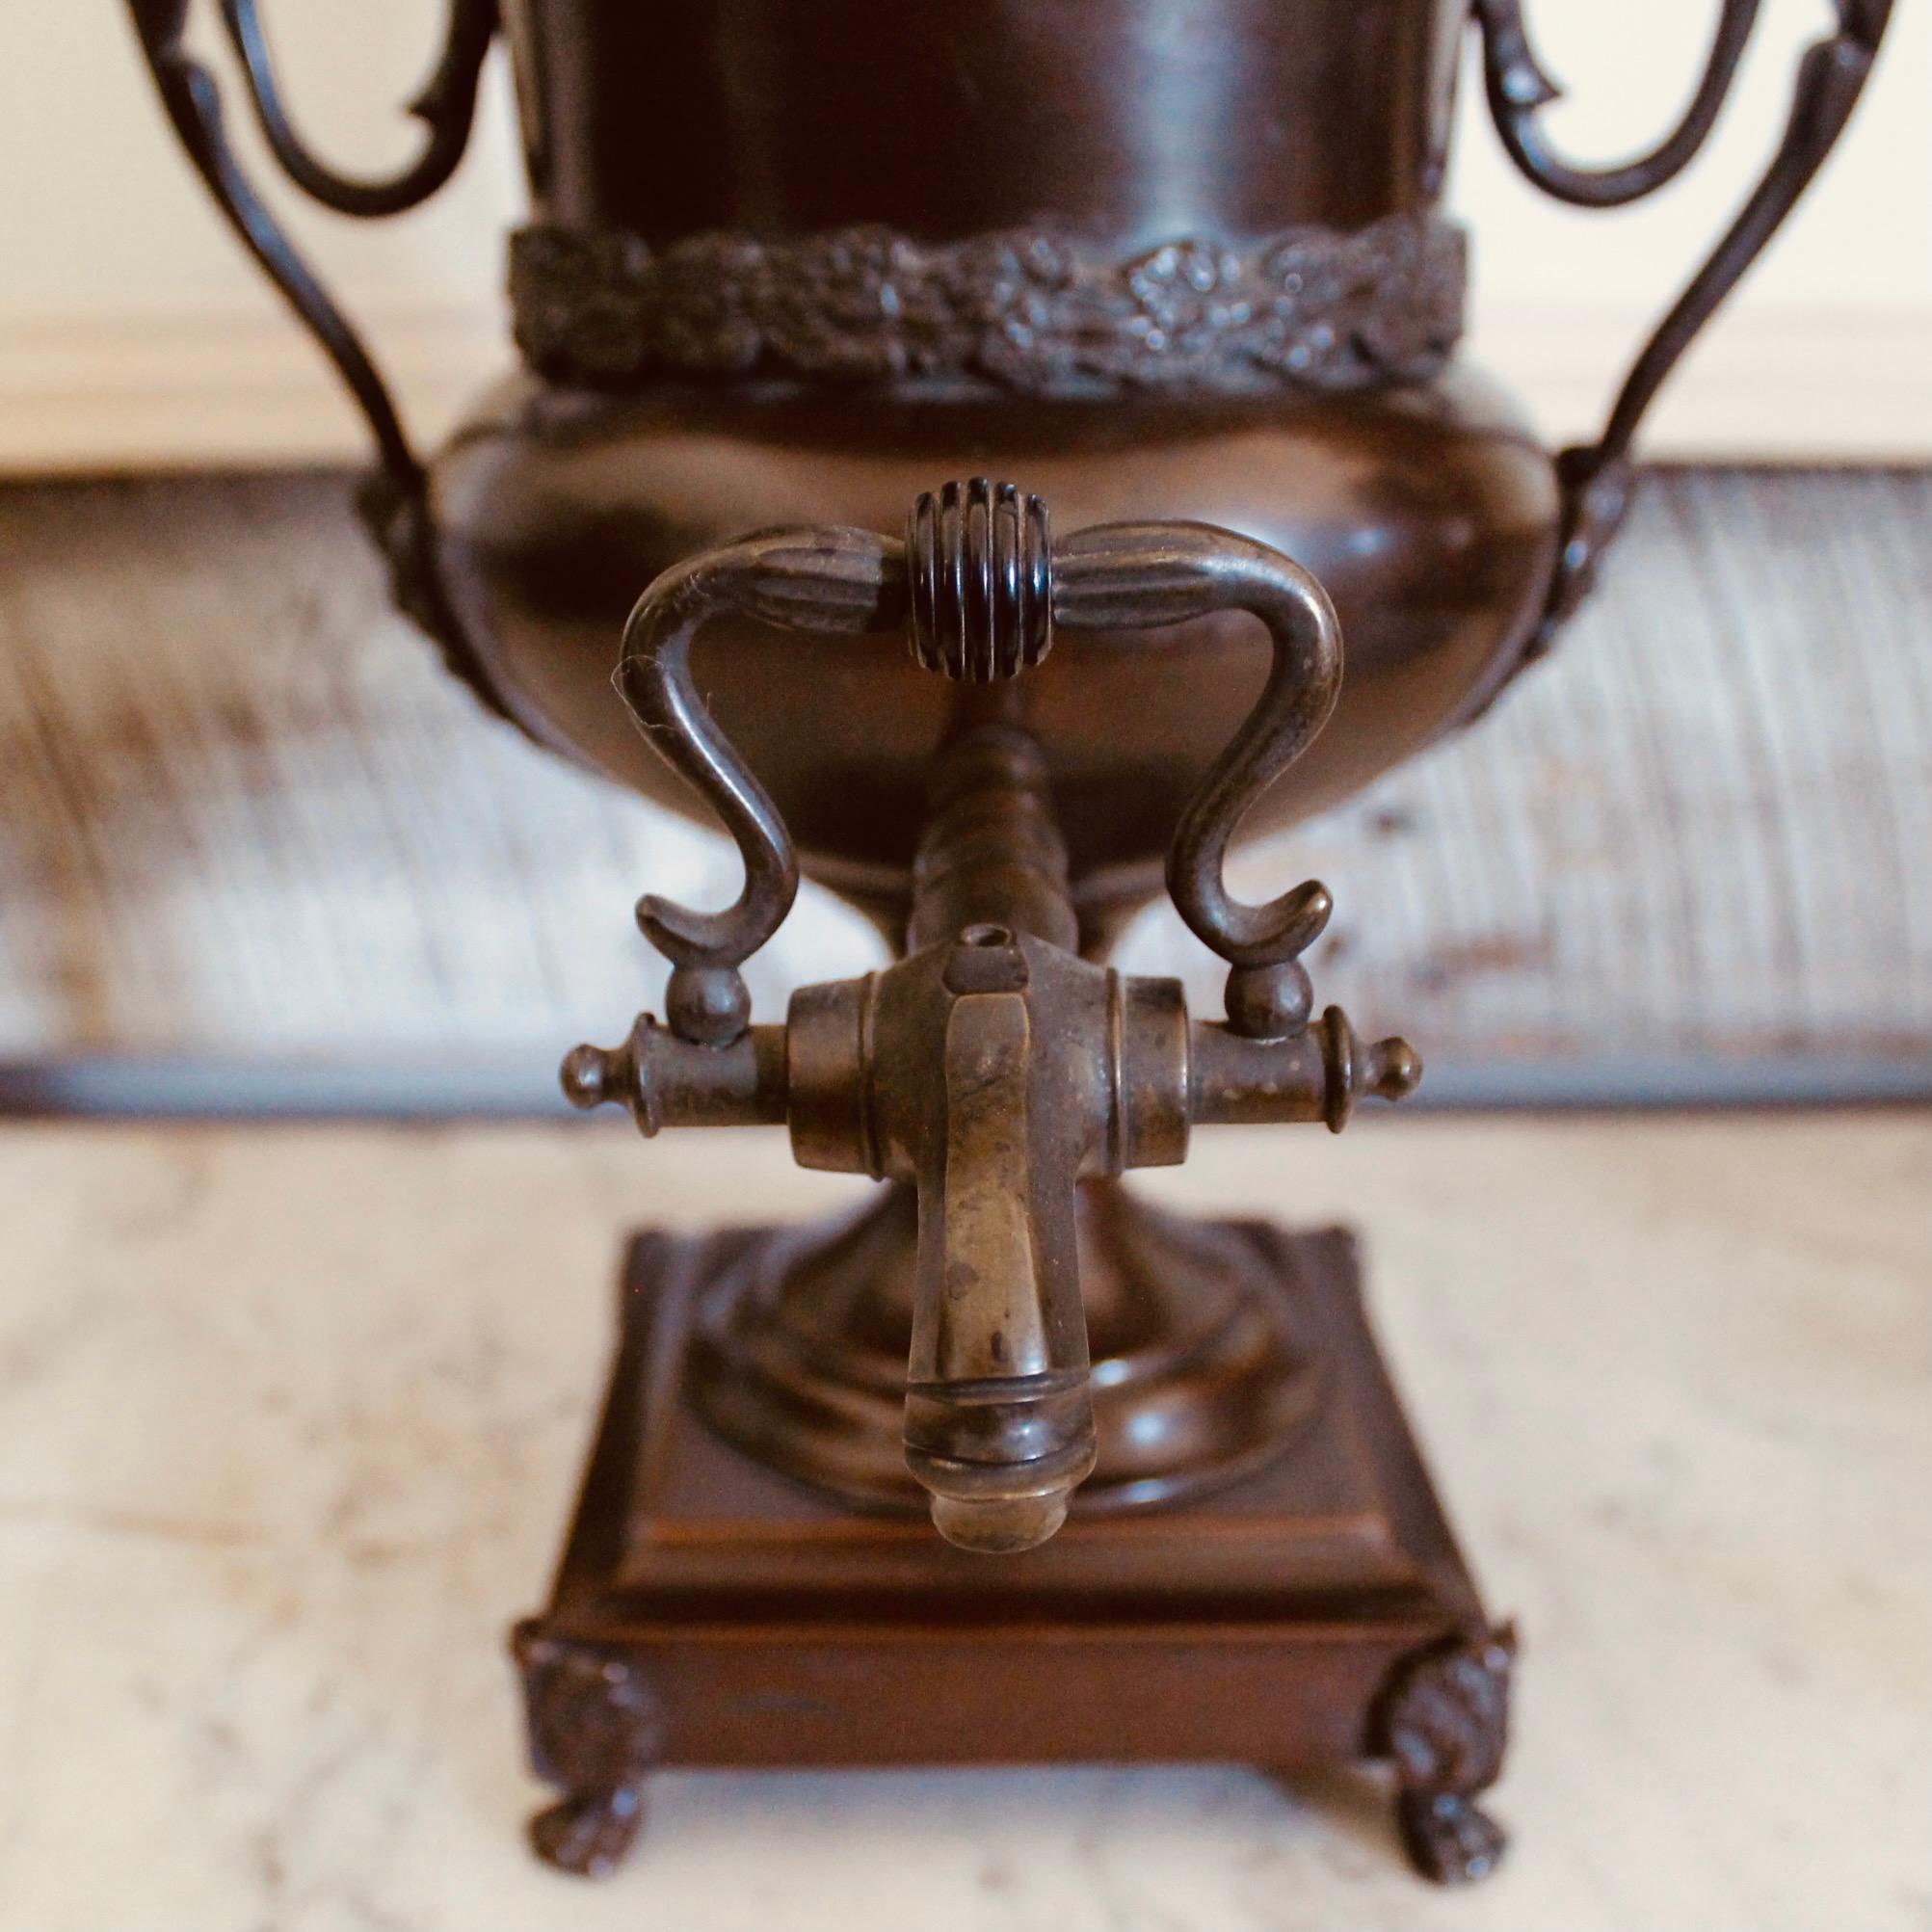 A very fine and decorative ca. 1810 footed hot water urn of dark patinated copper, with wonderful sculptural details in the manner of Wedgwood ceramics of the same period. A golden putto serves as the handle for the two part lid... a small opening